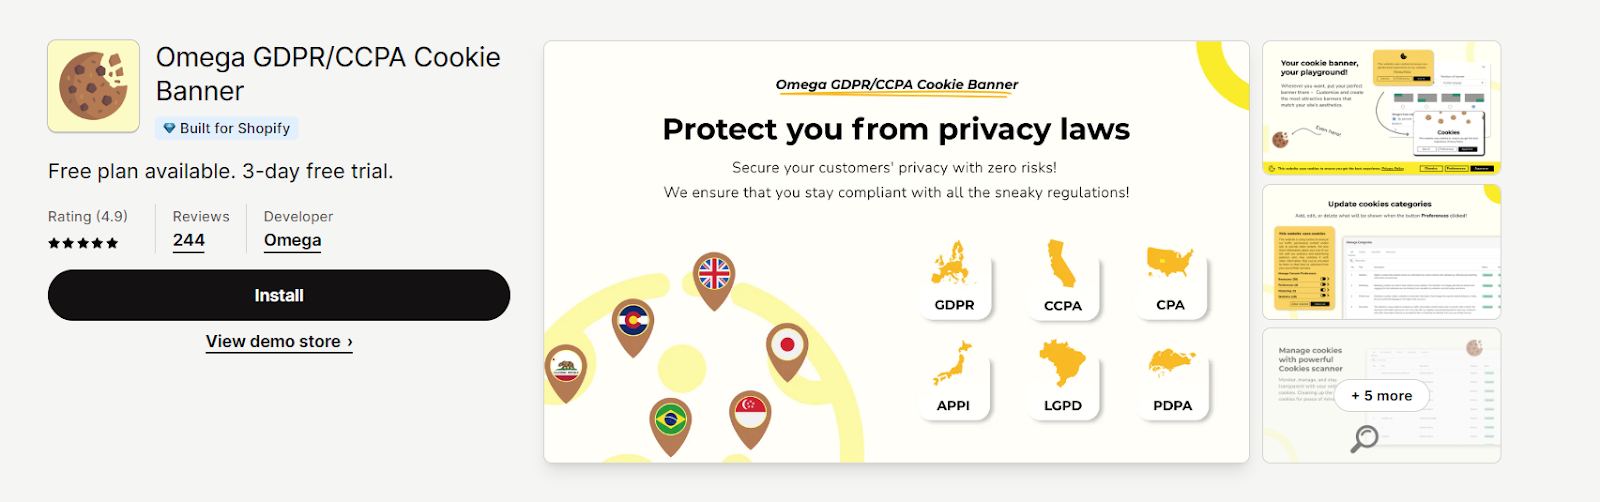 Omega GDPR/CCPA Cookie Banner